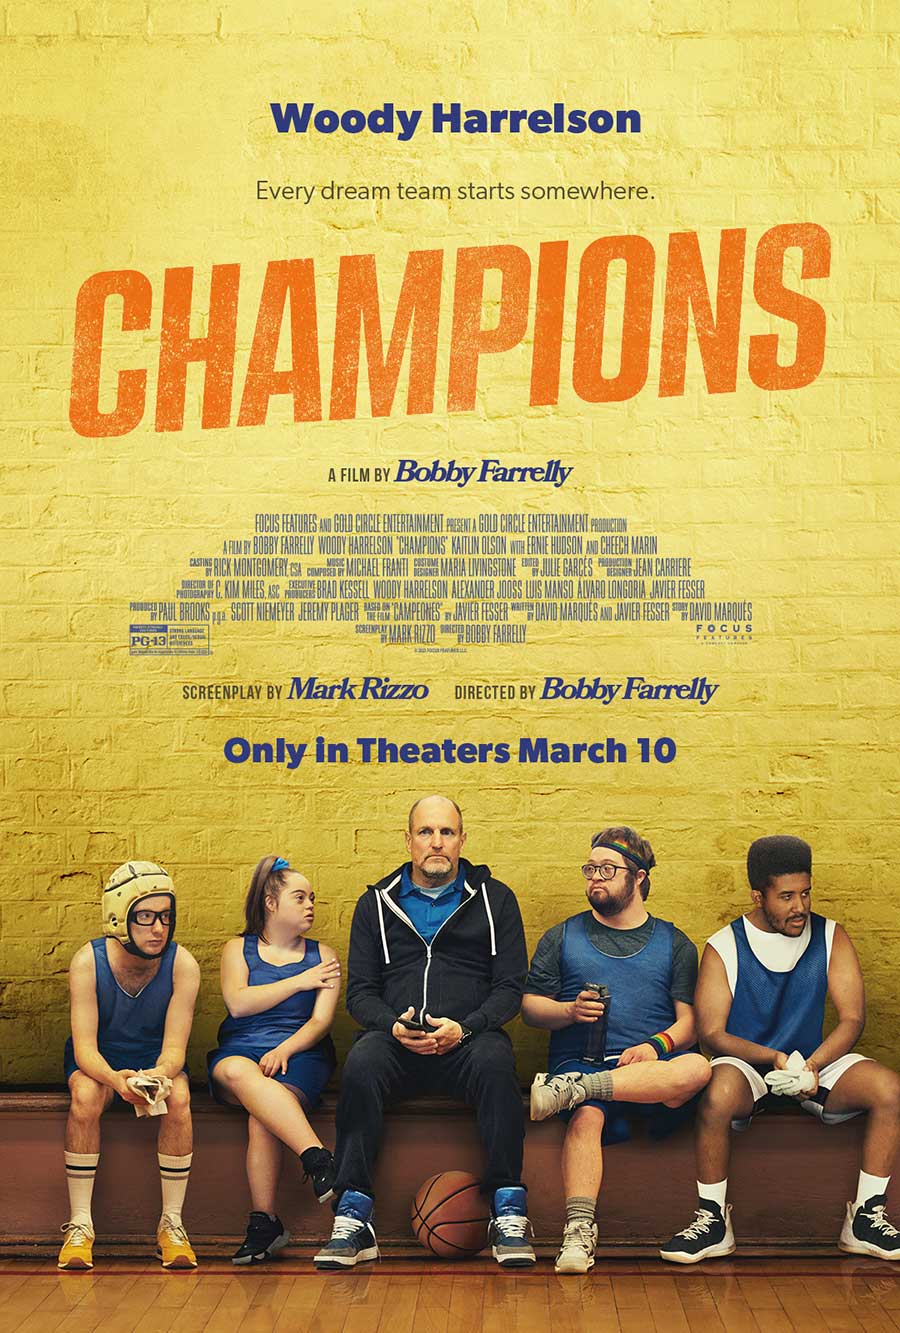 Poster for Champions